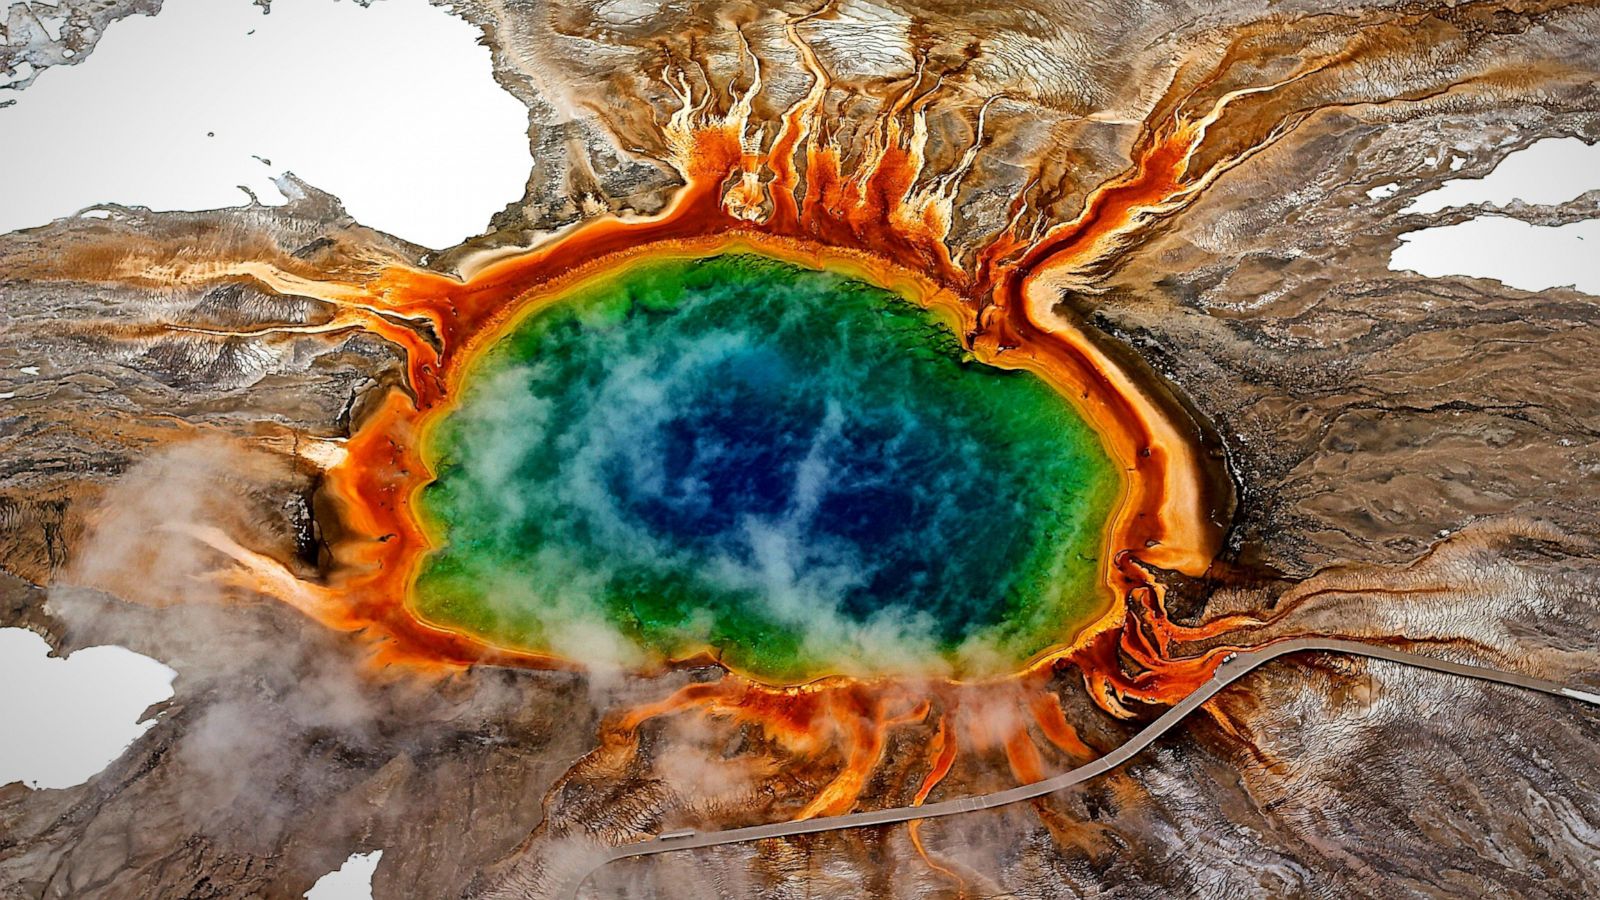 Blue Places The Grand Prismatic Spring, Yellowstone National Park Caldera, Wyoming